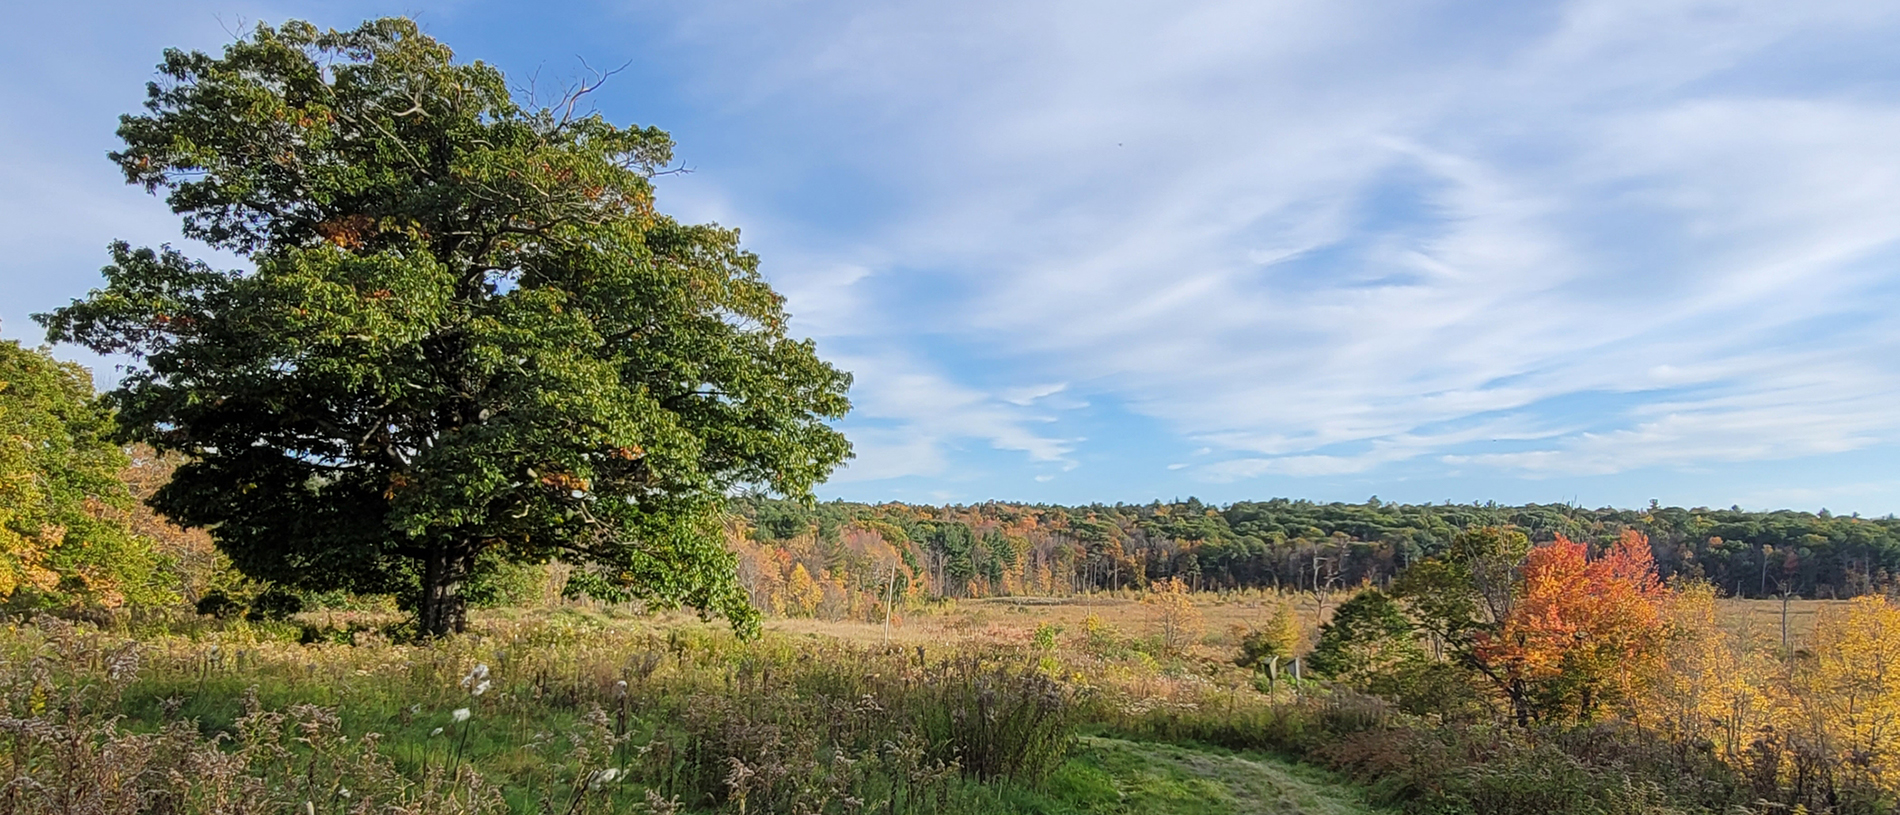 Meadow at Wachusett Meadow with tree on left and grass trail